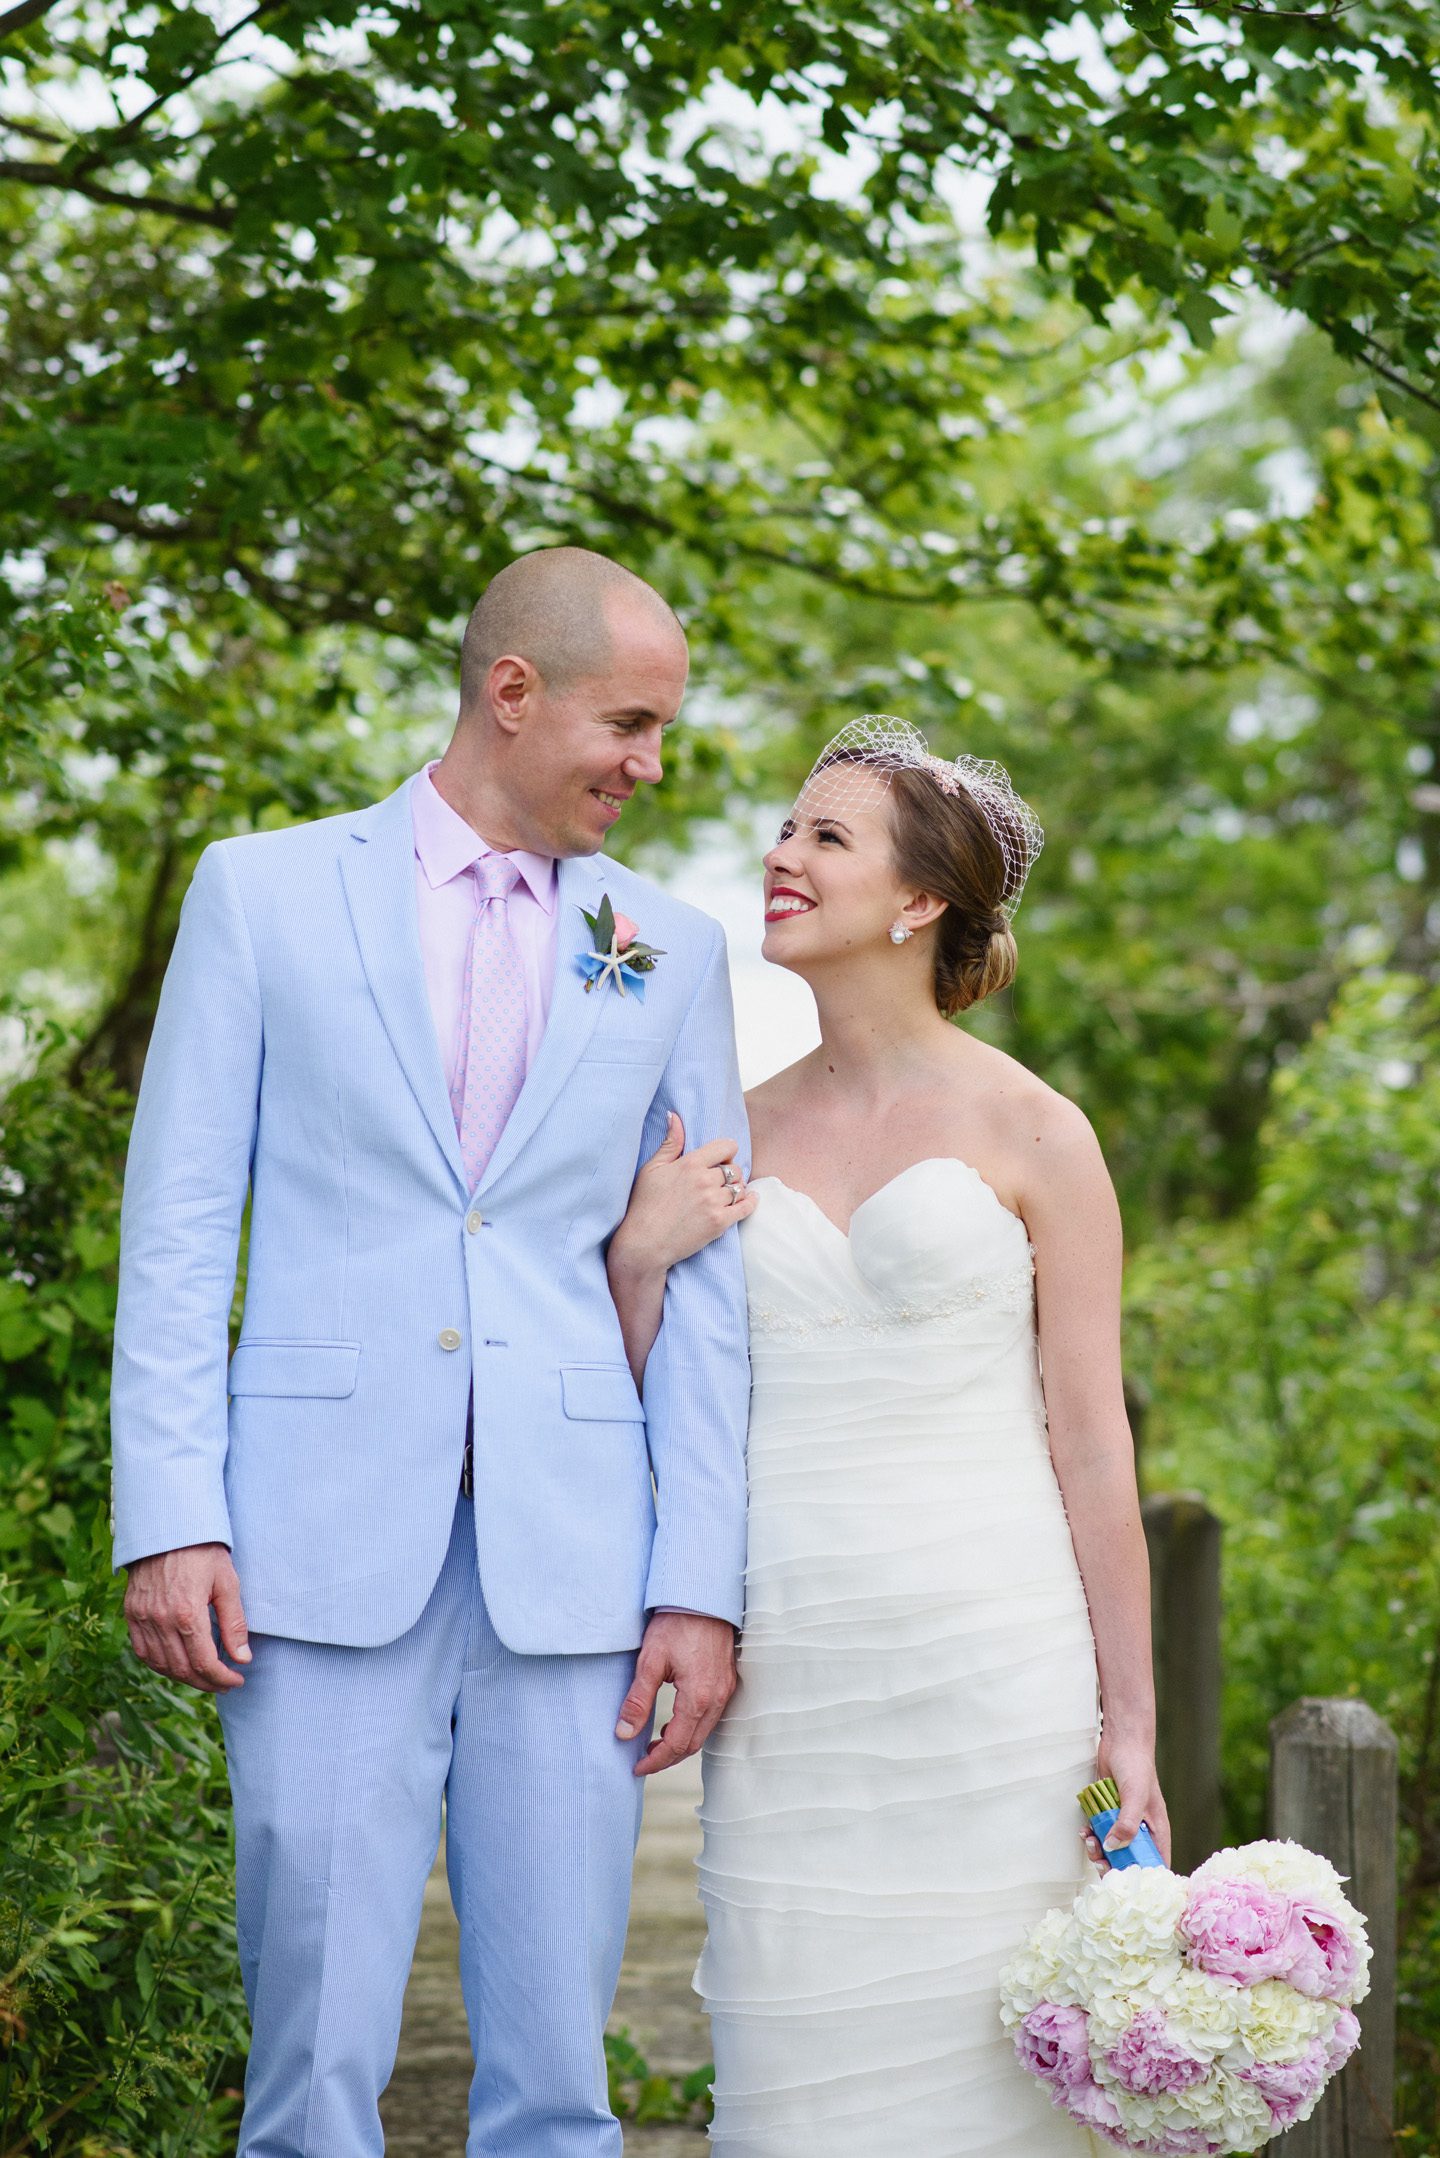 Outer Banks Wedding at the Grade Ritz Palm Photographers Neil GT Photography Wedding Photographer